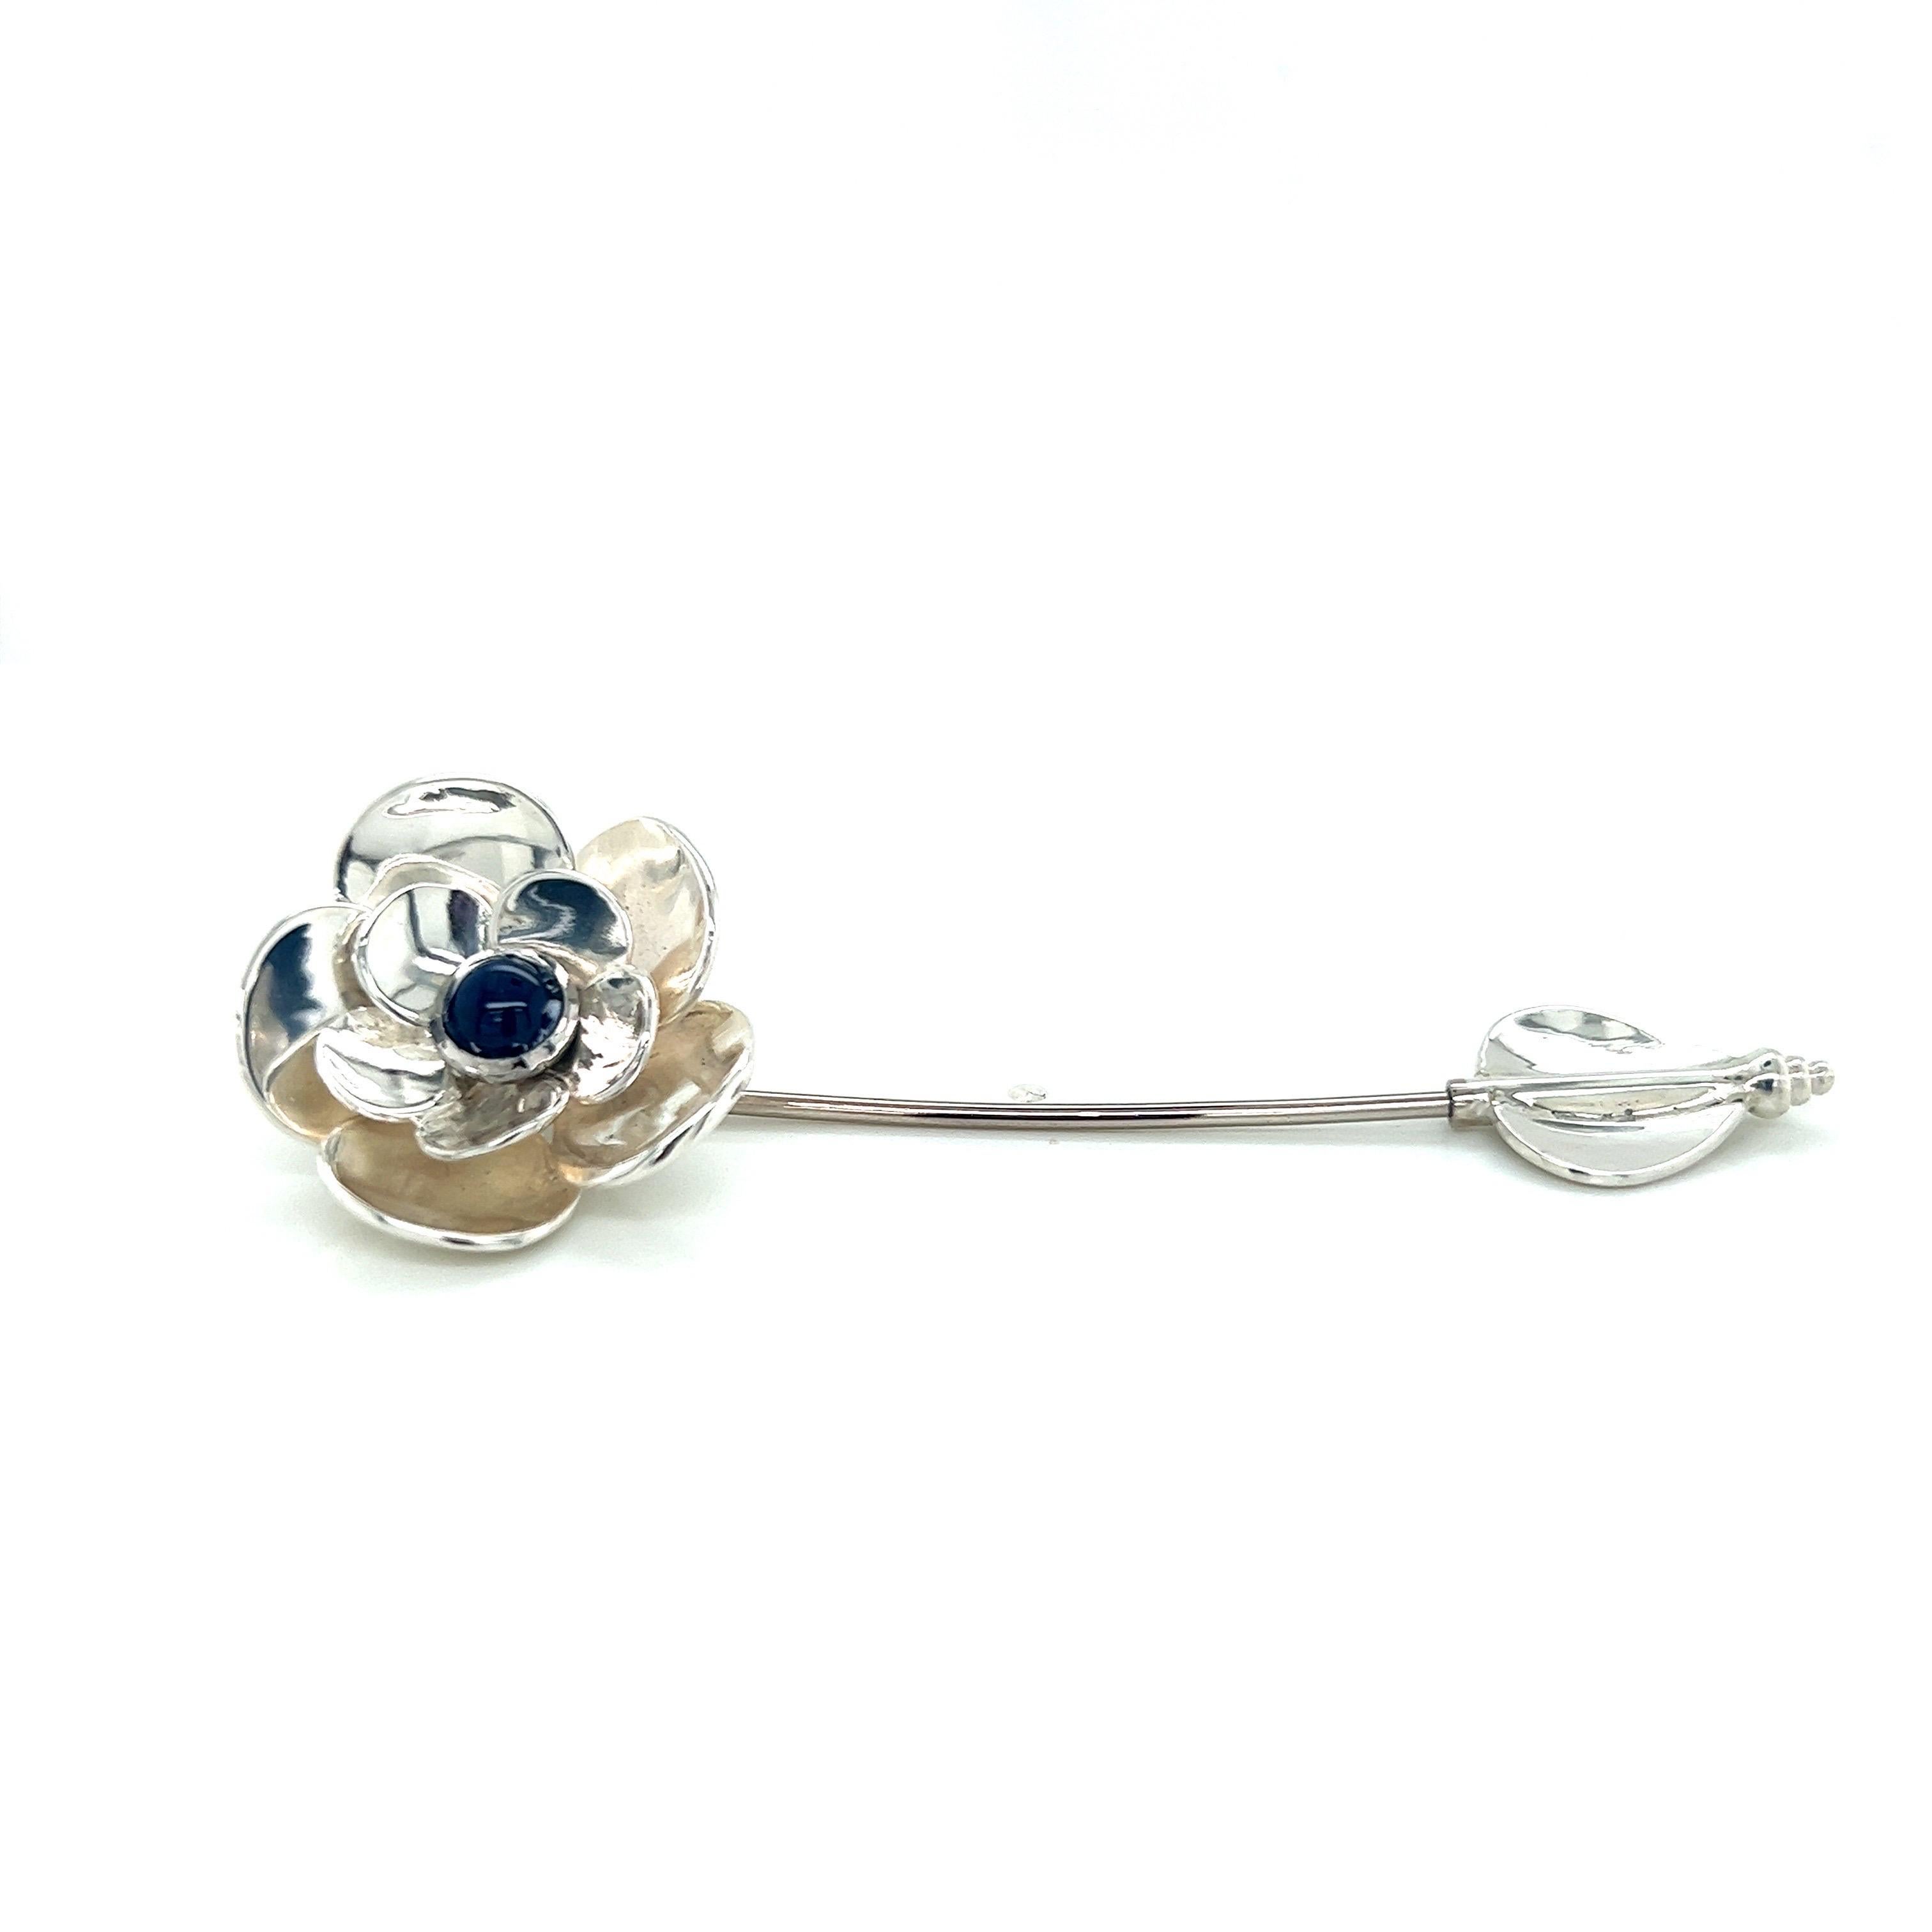 Women's or Men's Sterling Silver, Platinum, and 14k White Gold Flower Pin with Cabochon Sapphire For Sale